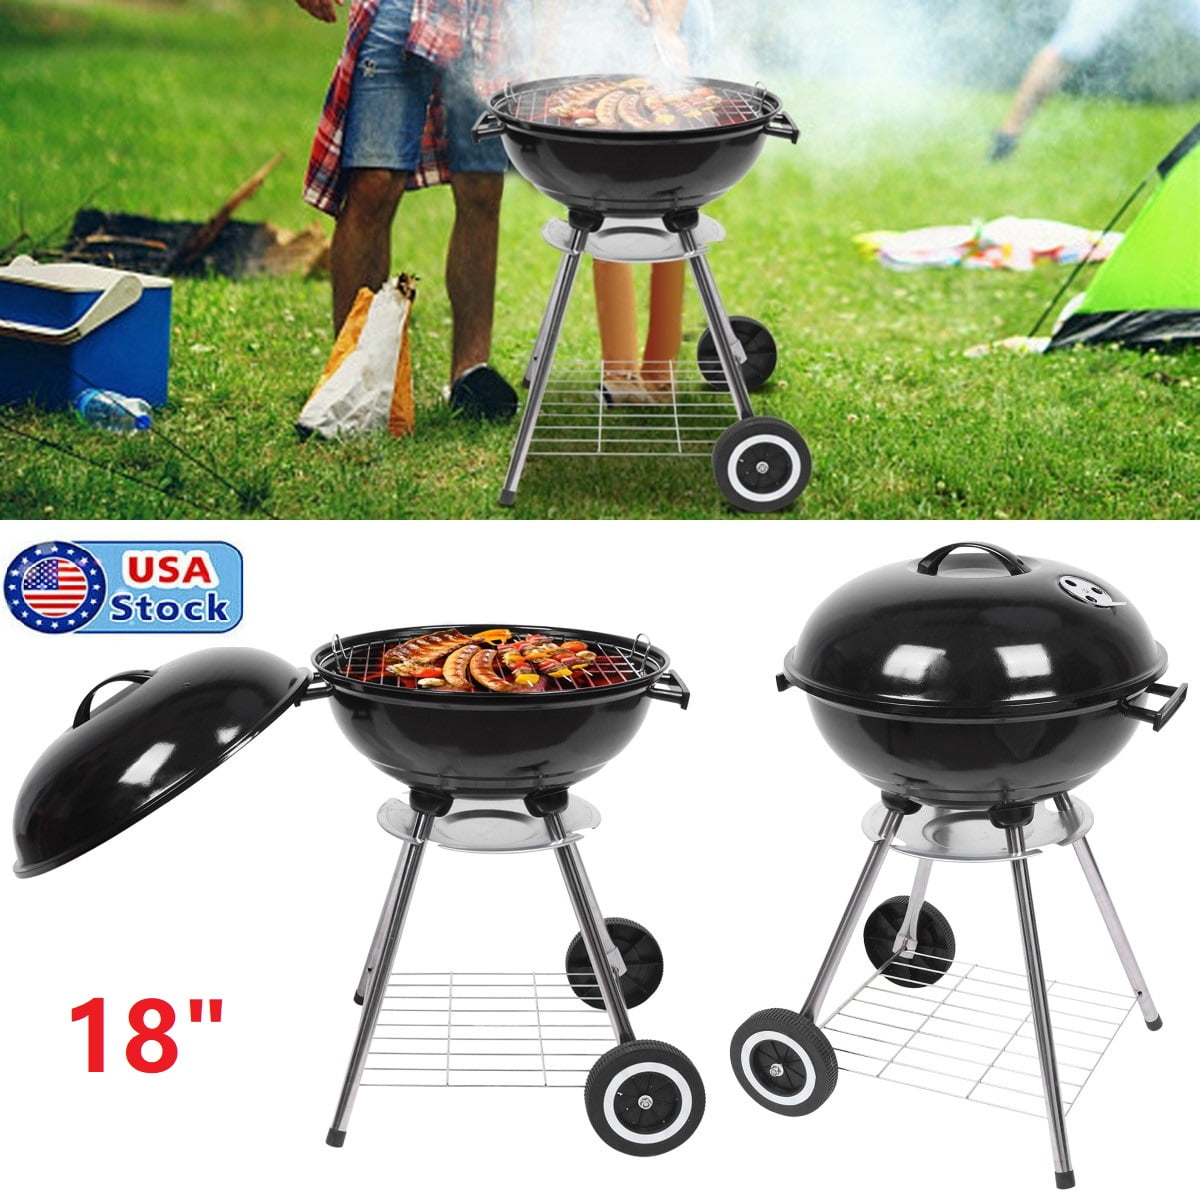 pastel Voorwoord hetzelfde Atotoa 18 Inch Charcoal Grill Bundle Chimney Starter,23.6" H Portable Charcoal  Grill For Outdoor Camping Cooking Barbecue,Black - Walmart.com